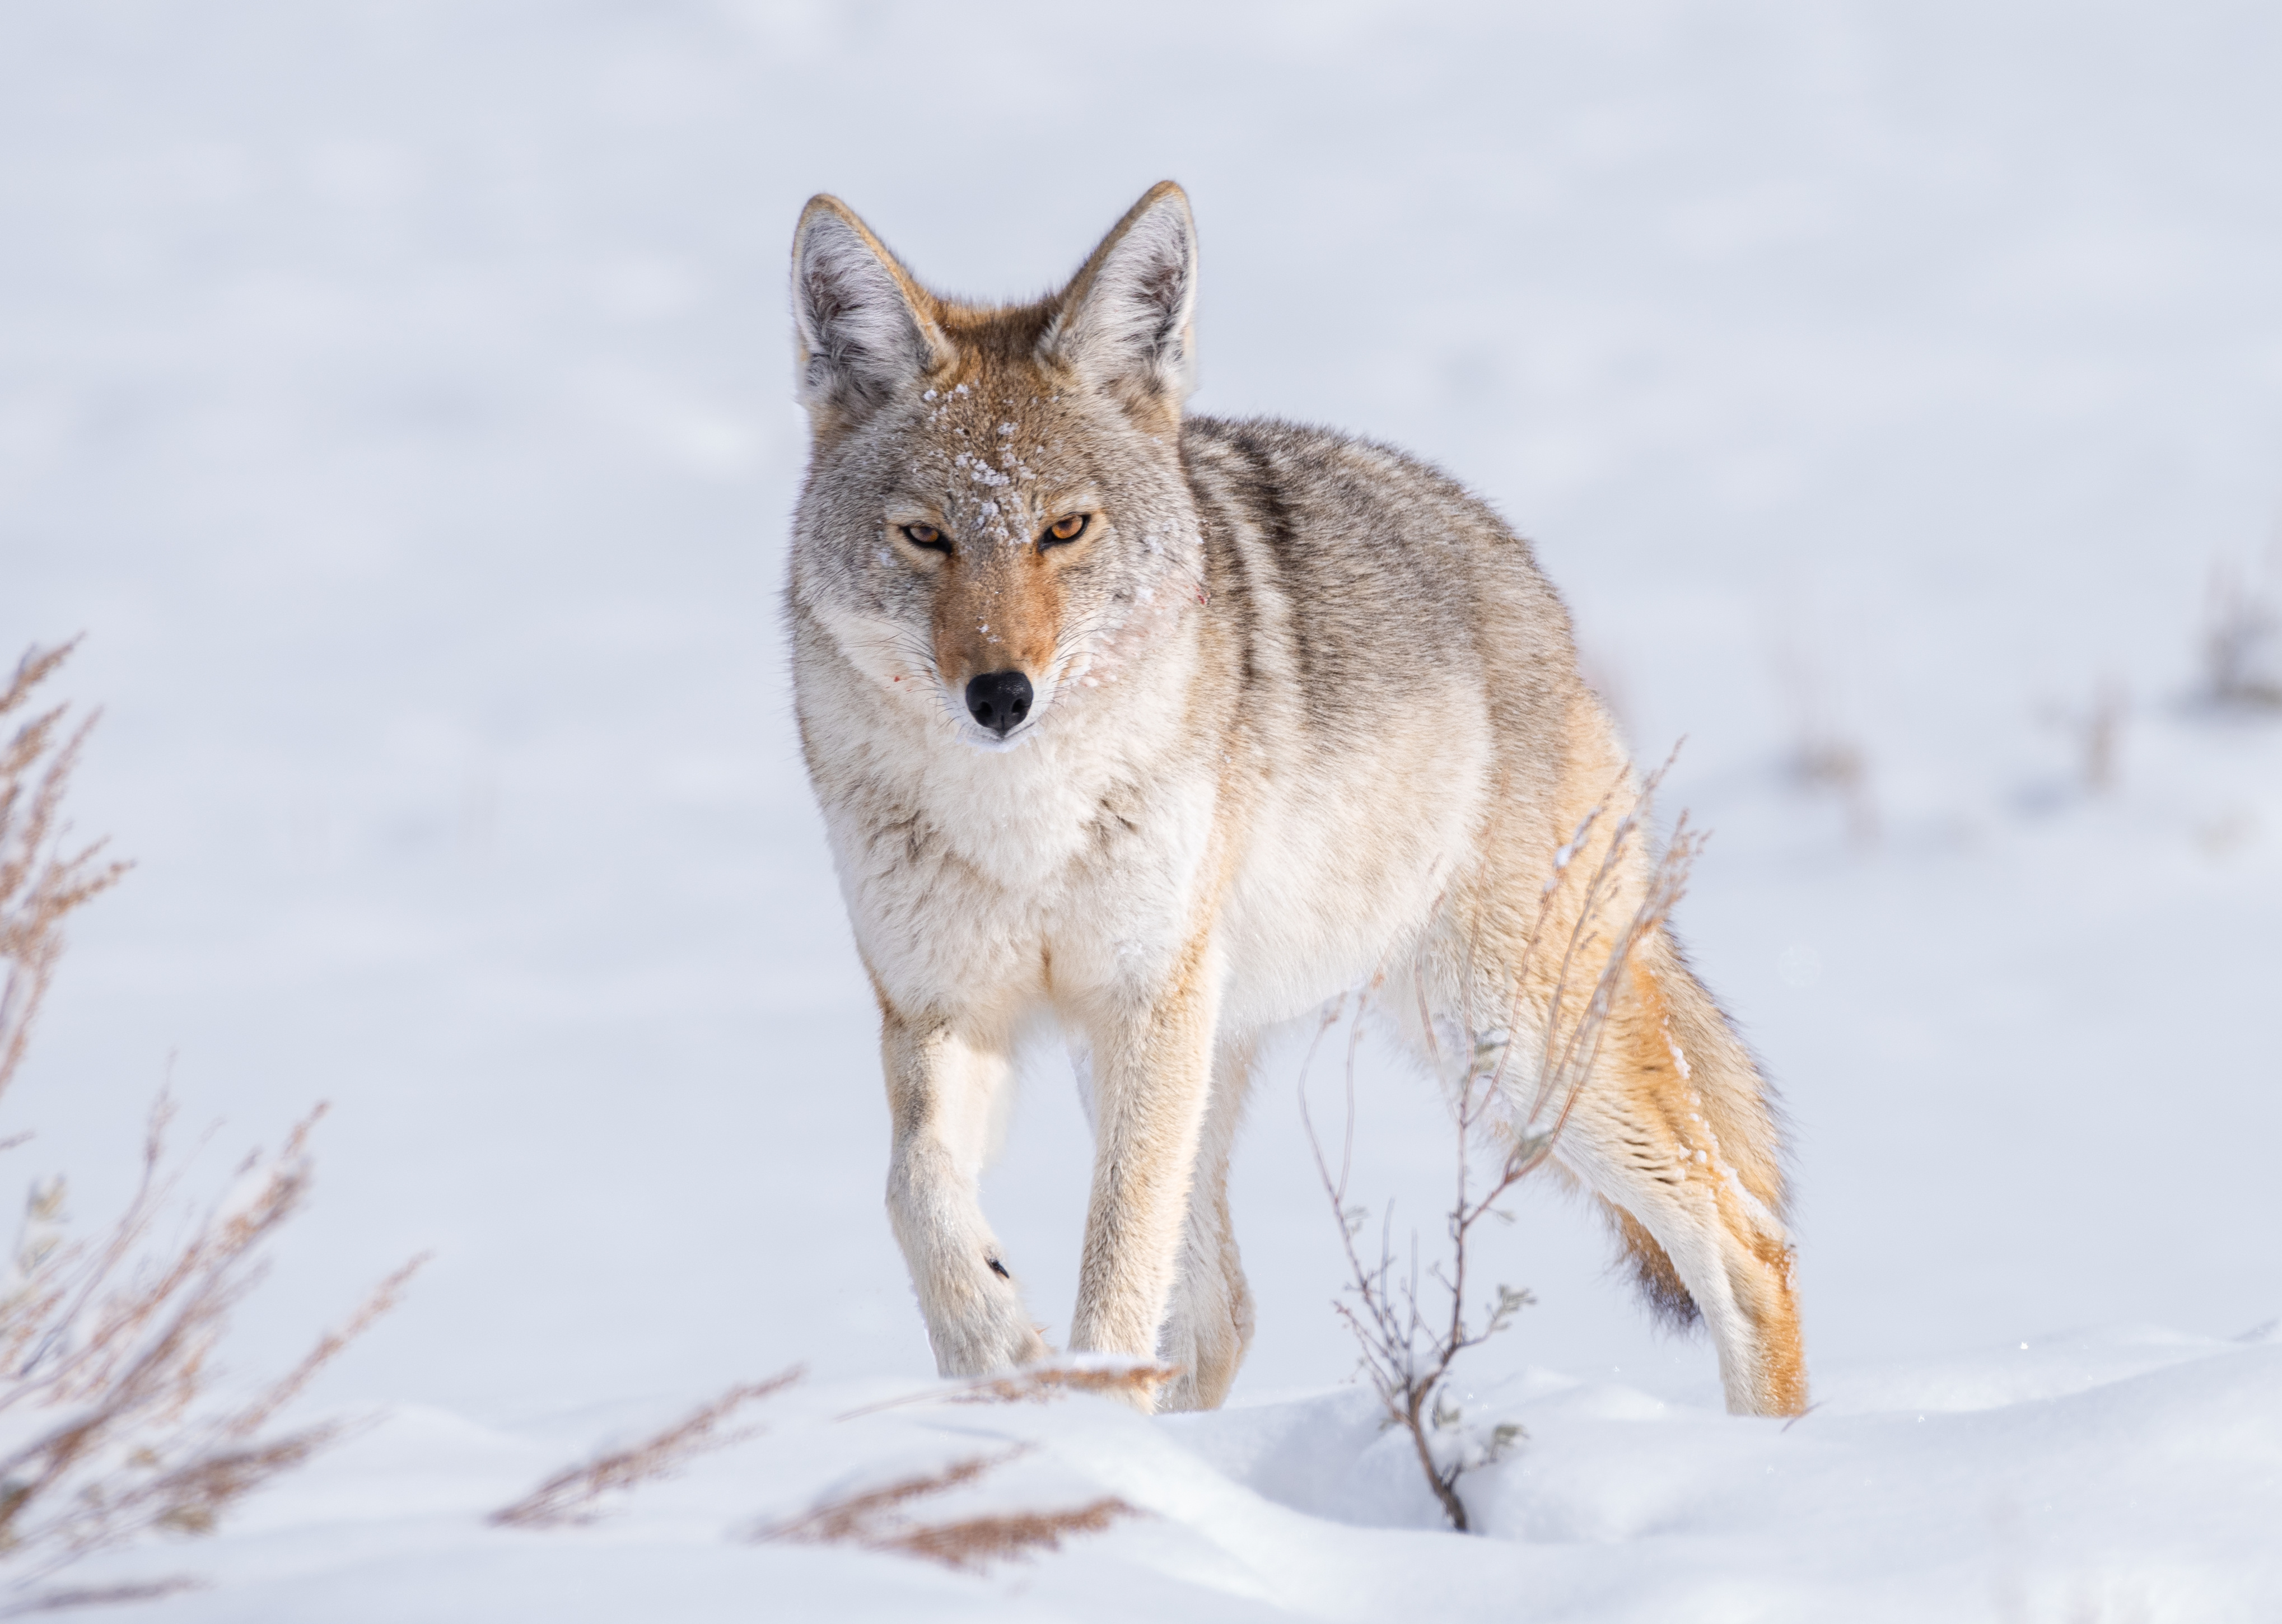 The coyote is common throughout Utah, they are heard more often than they are seen.